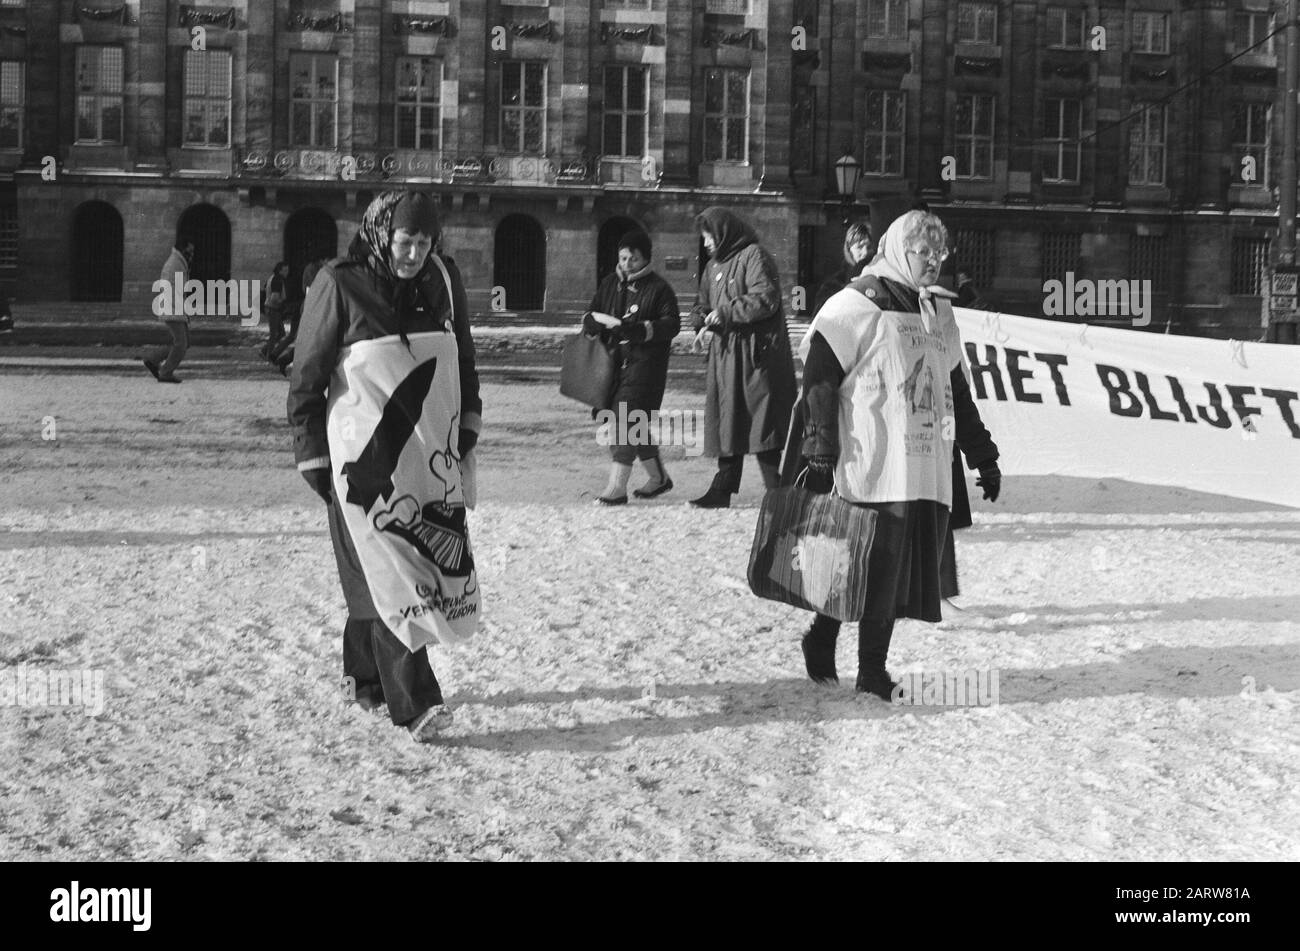 Silence circle op Dam as protest against the nuclear armament women during the protest in the snow in Amsterdam/negative smoke Date: January 7, 1985 Location: Amsterdam, Noord-Holland Keywords: SNOW, protests, women Stock Photo